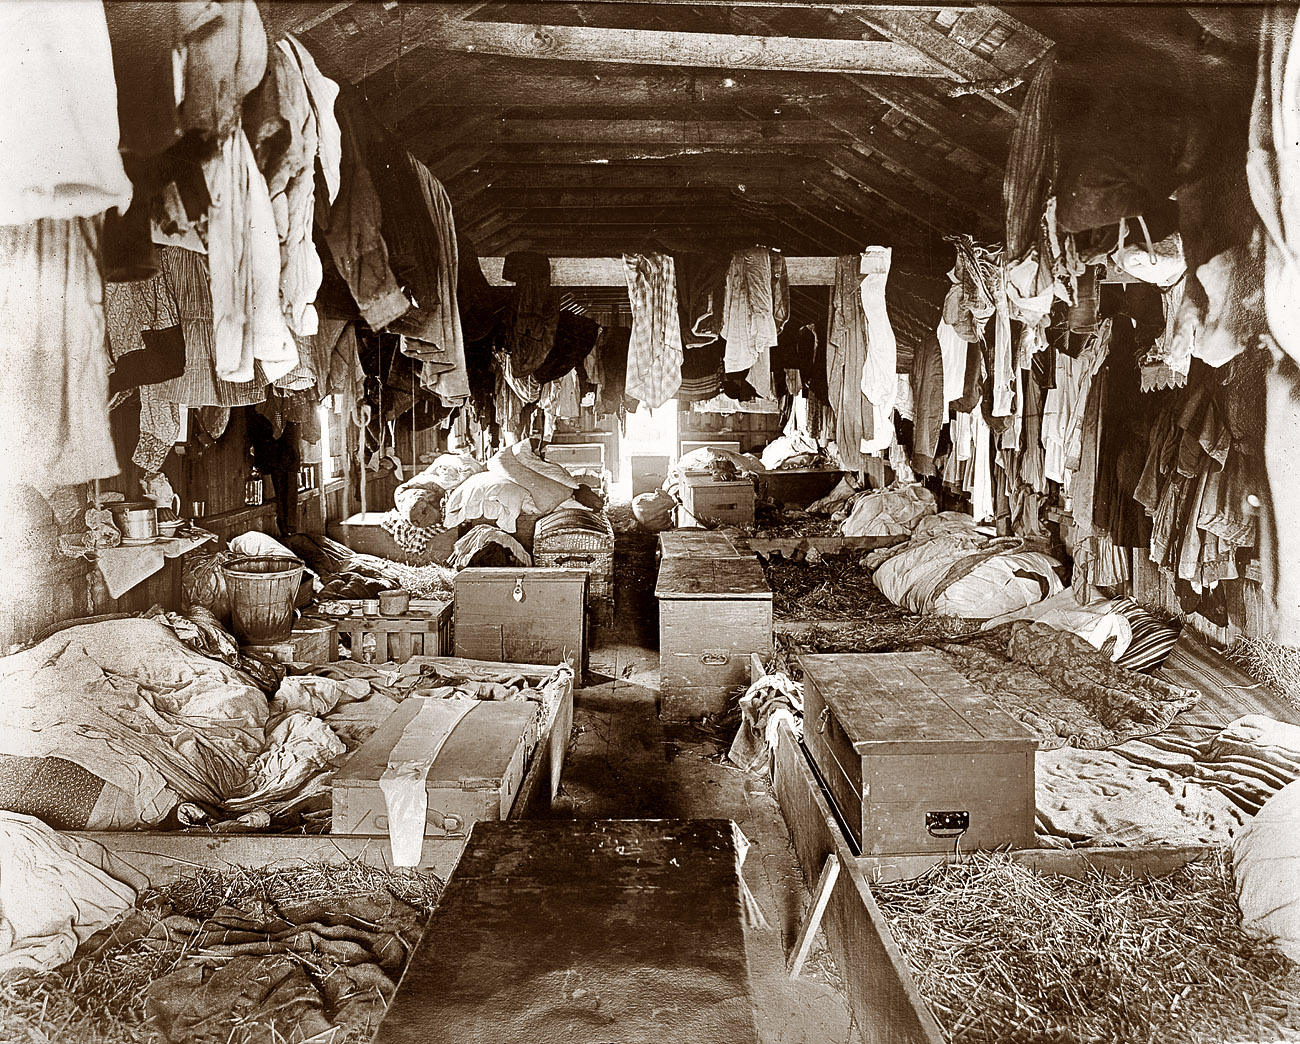 Circa 1909. Straw beds and footlockers in shack occupied by berry pickers. Anne Arundel County, Maryland. View full size. Photograph by Lewis Wickes Hine.